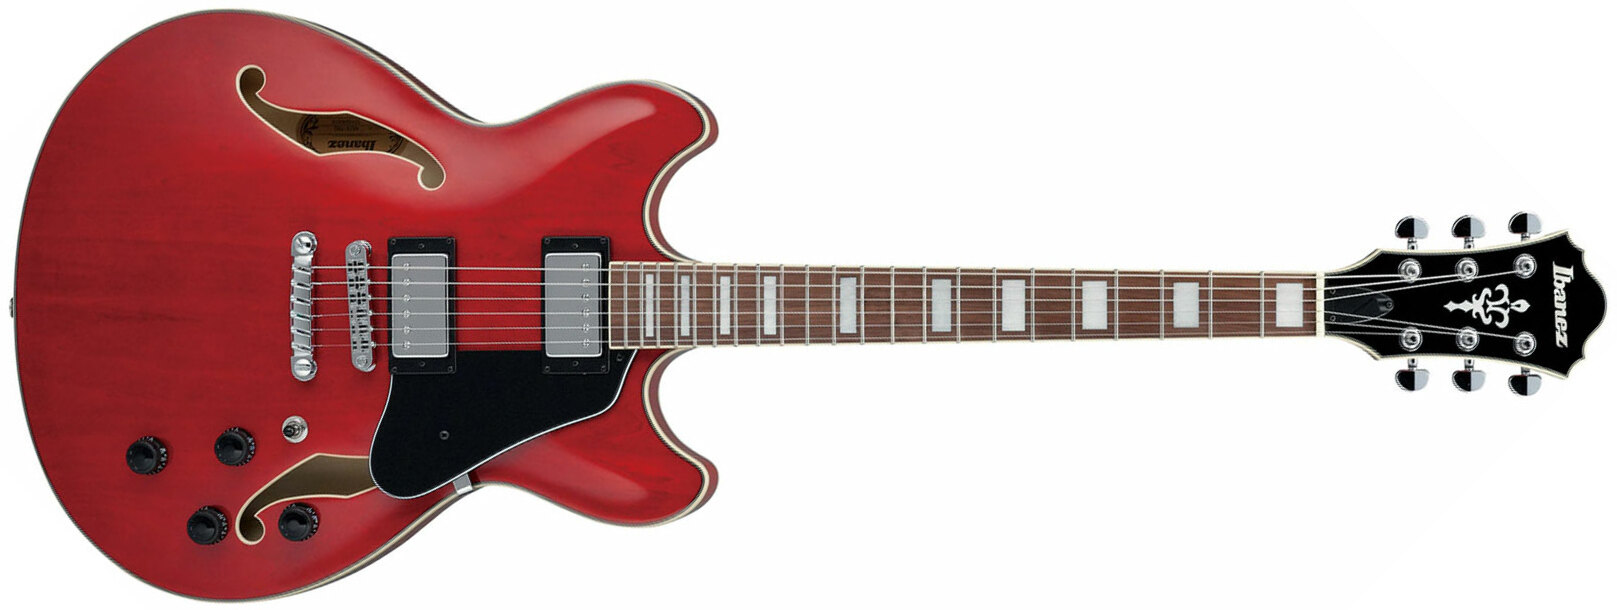 Ibanez As73 Tcd Artcore Hh Ht Noy - Transparent Cherry Red - Semi hollow elektriche gitaar - Main picture